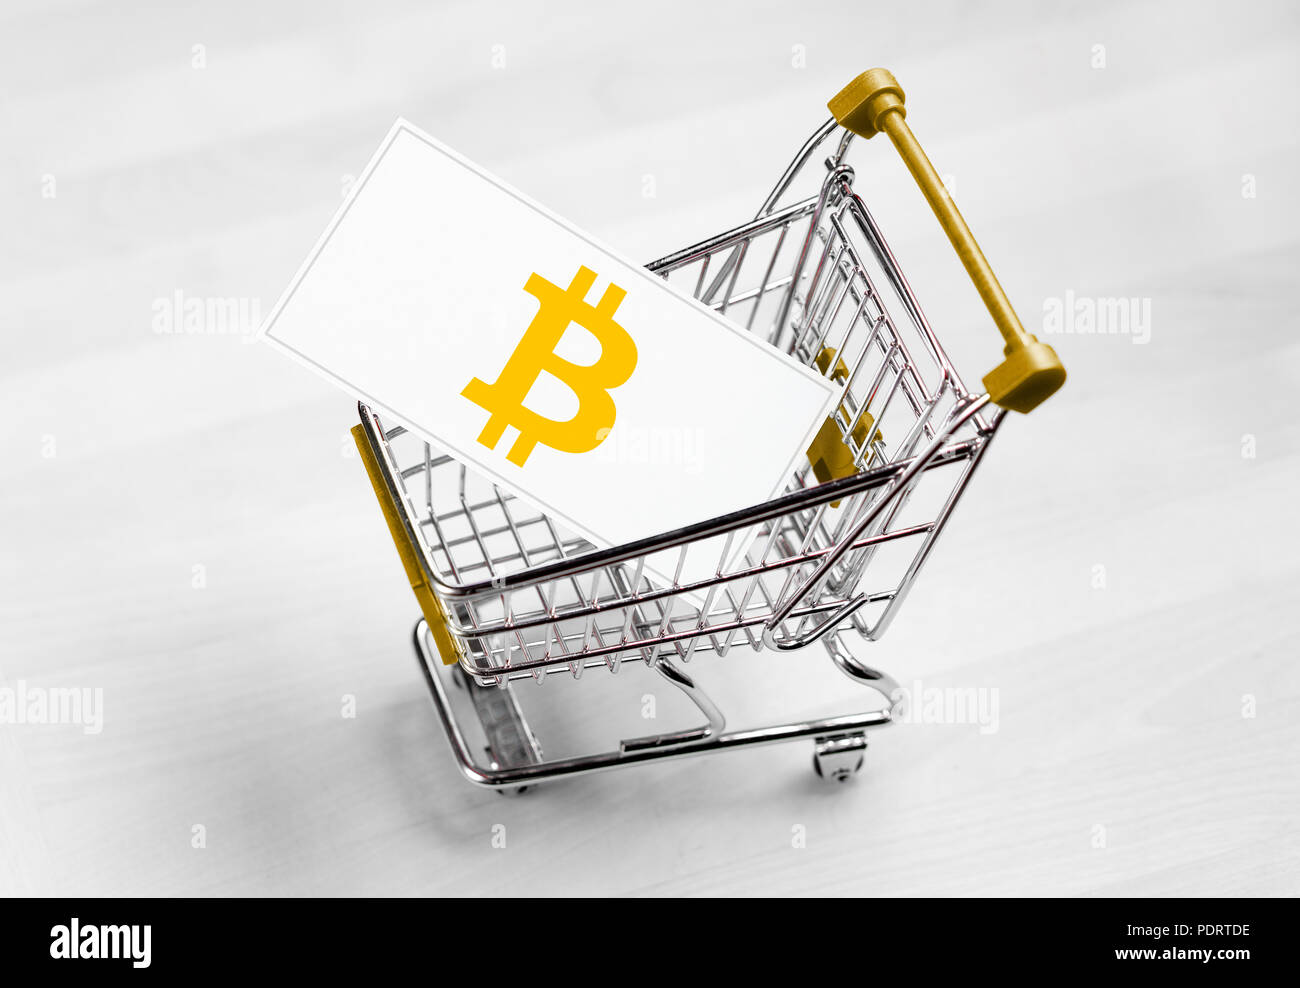 Bitcoin logo on a business card in shopping cart. Buying or selling cryptocurrency concept. Stock Photo